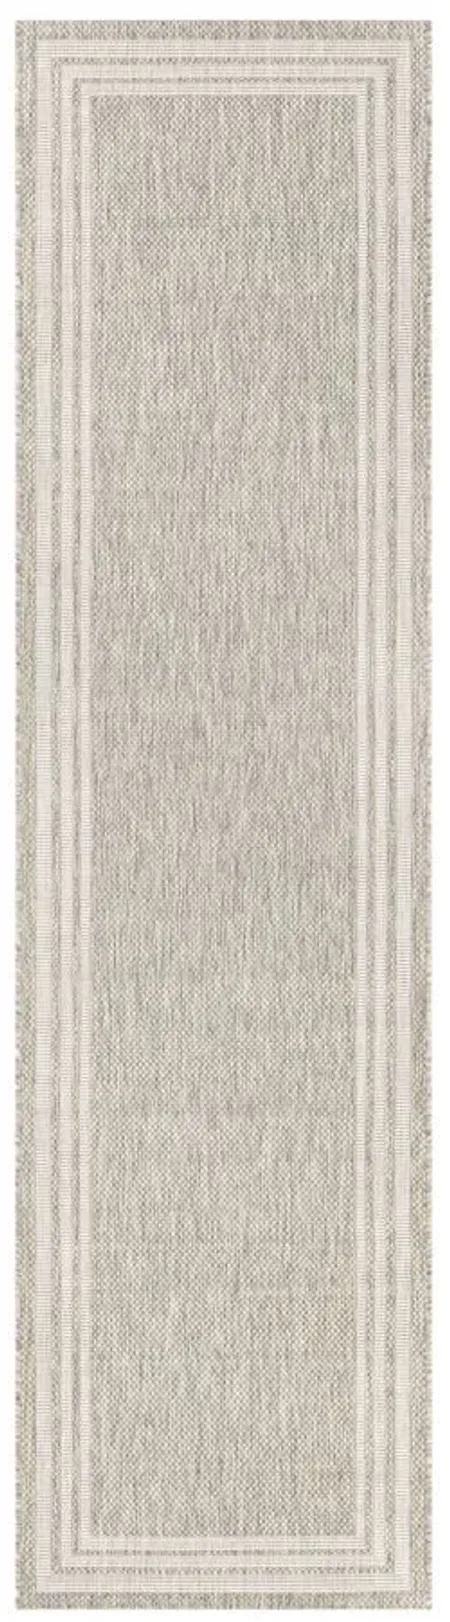 Eagean Bordered Indoor/Outdoor Runner Rug in Oatmeal, Gray, Light Beige, Taupe by Surya